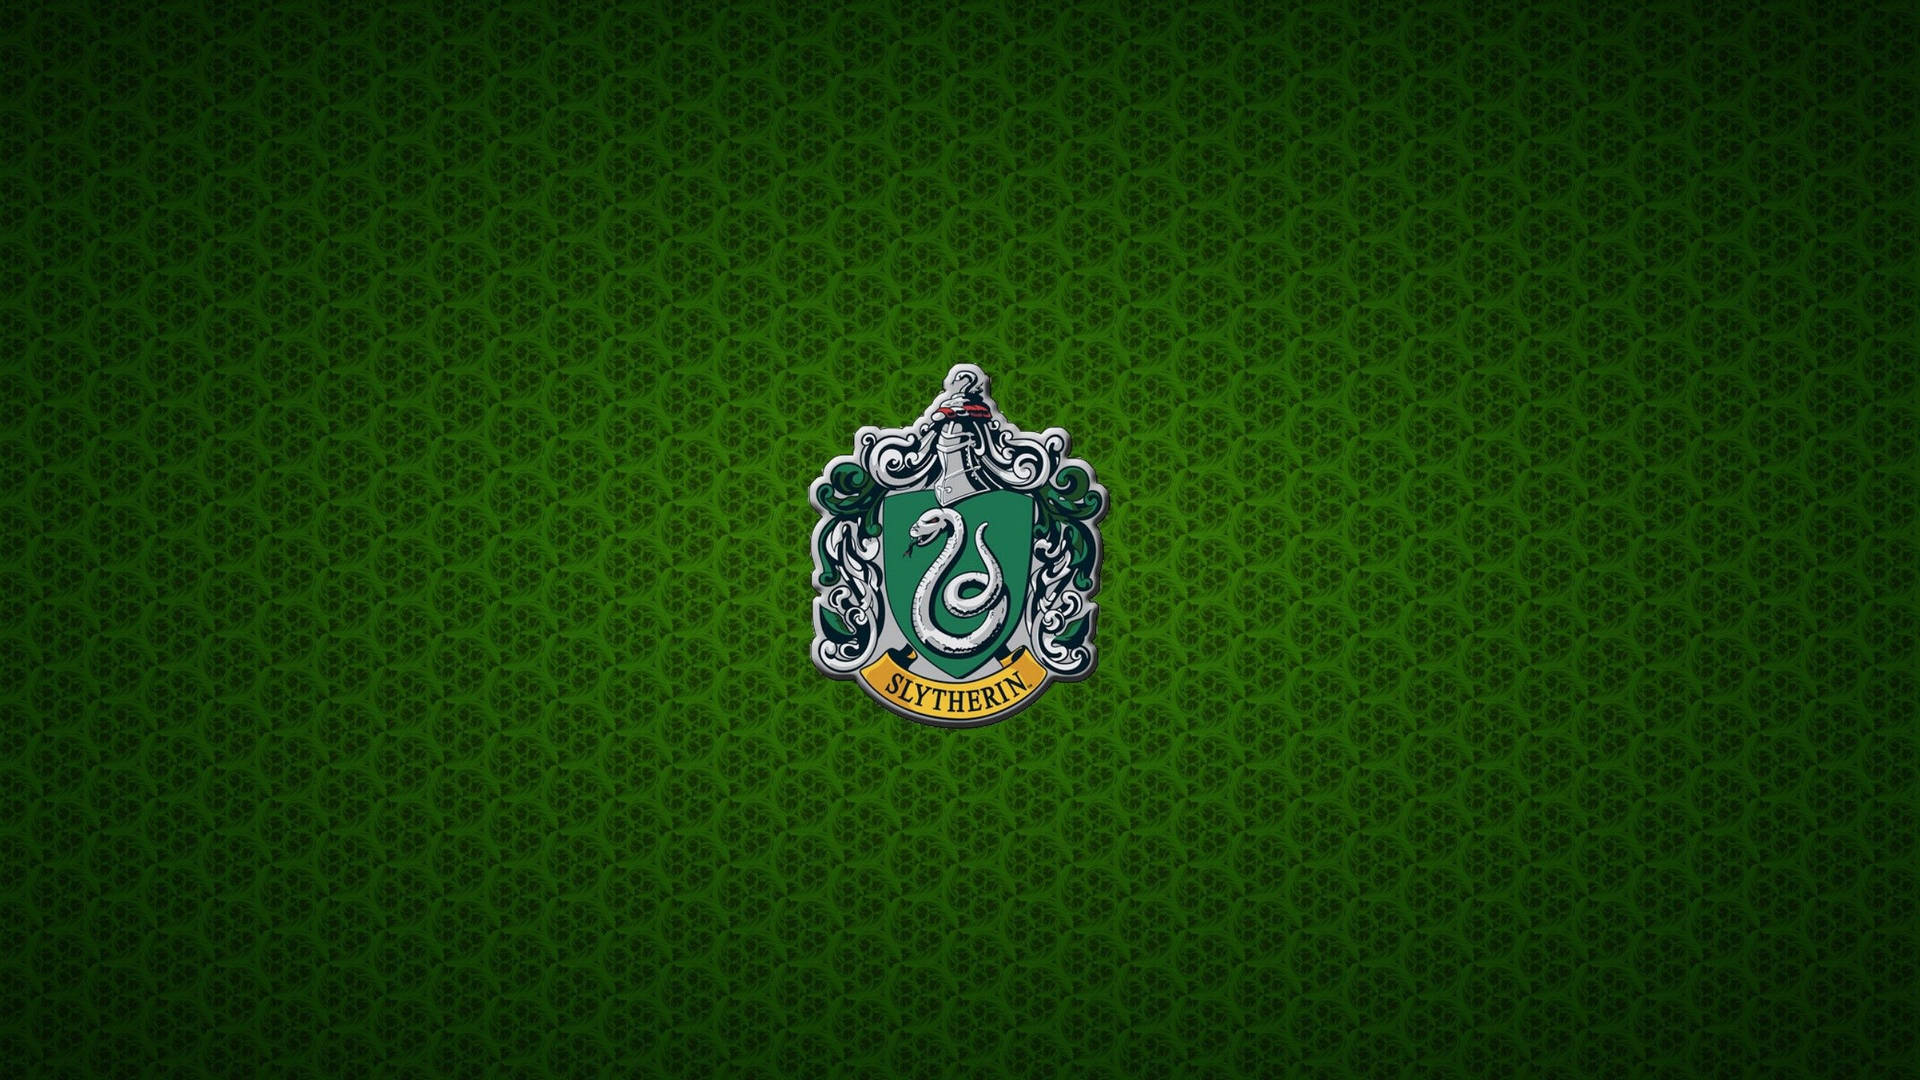 Free Slytherin Wallpaper Downloads, [100+] Slytherin Wallpapers for FREE |  